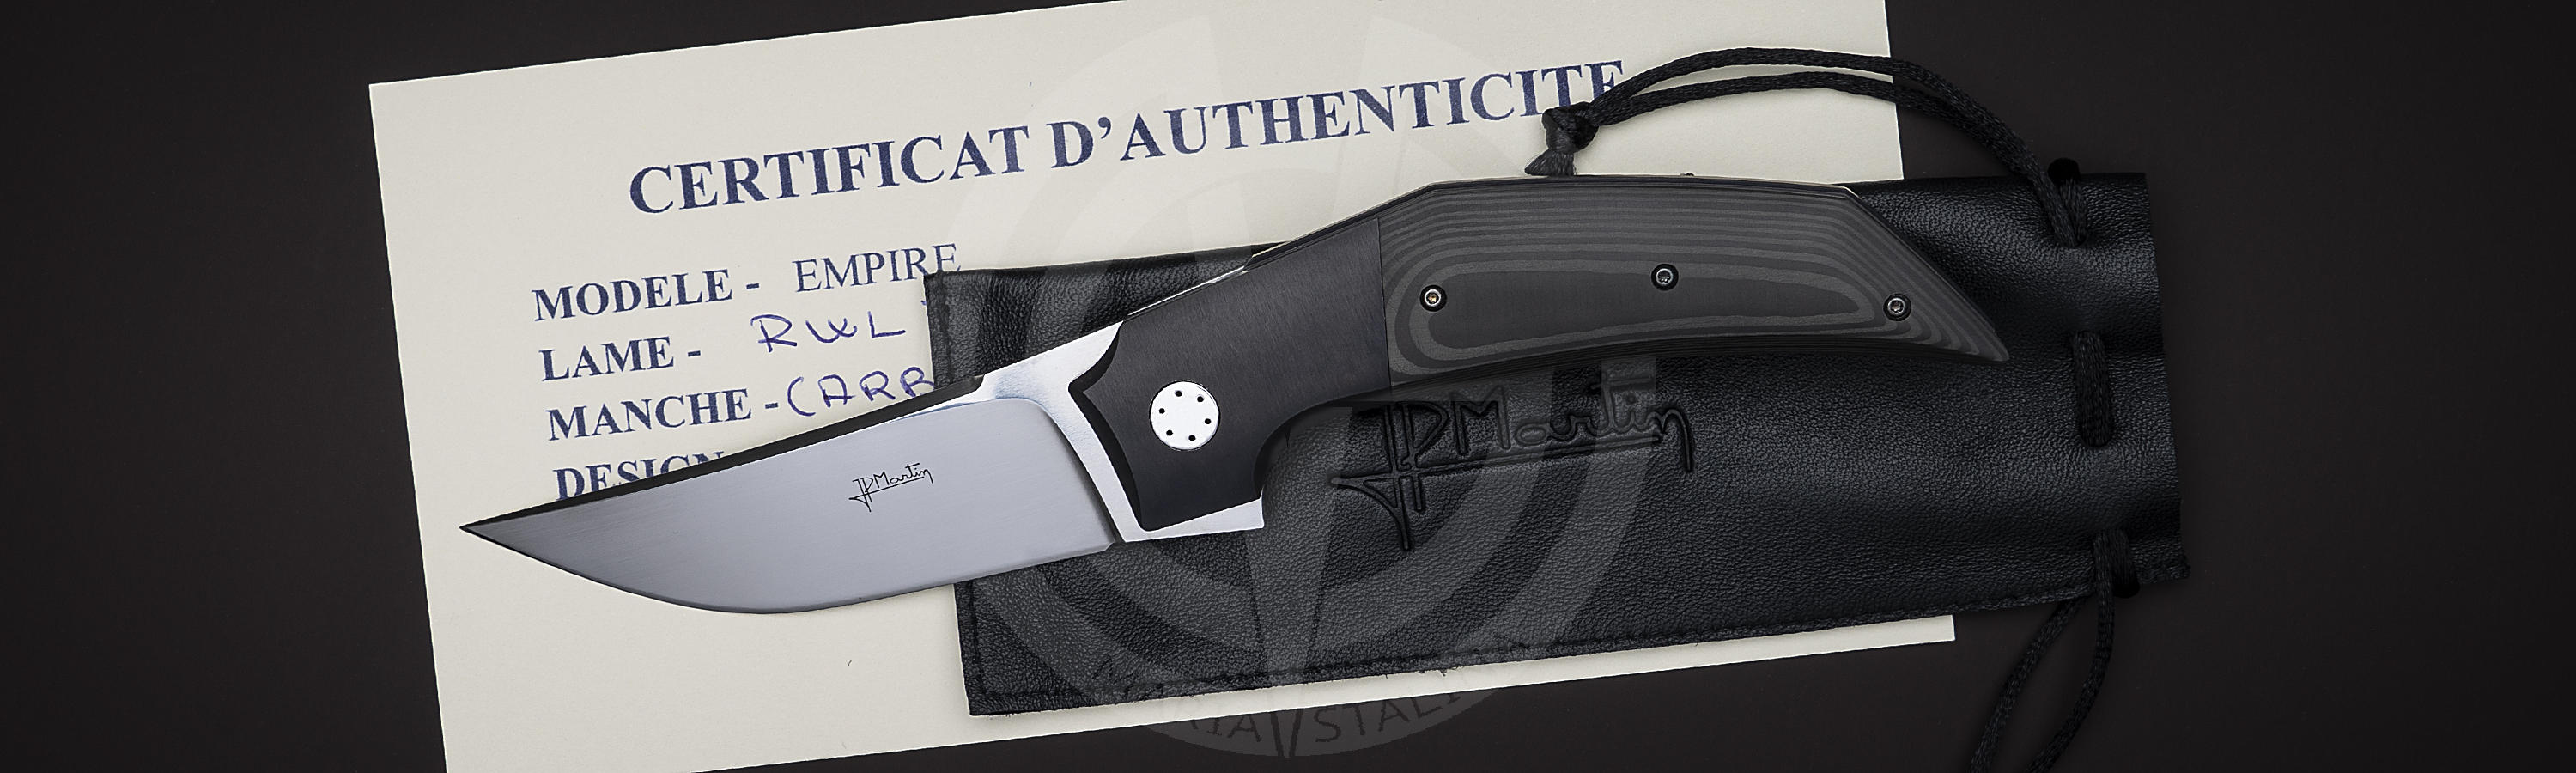 Custom knife Empire comes with a leather case and certificate of authenticity.